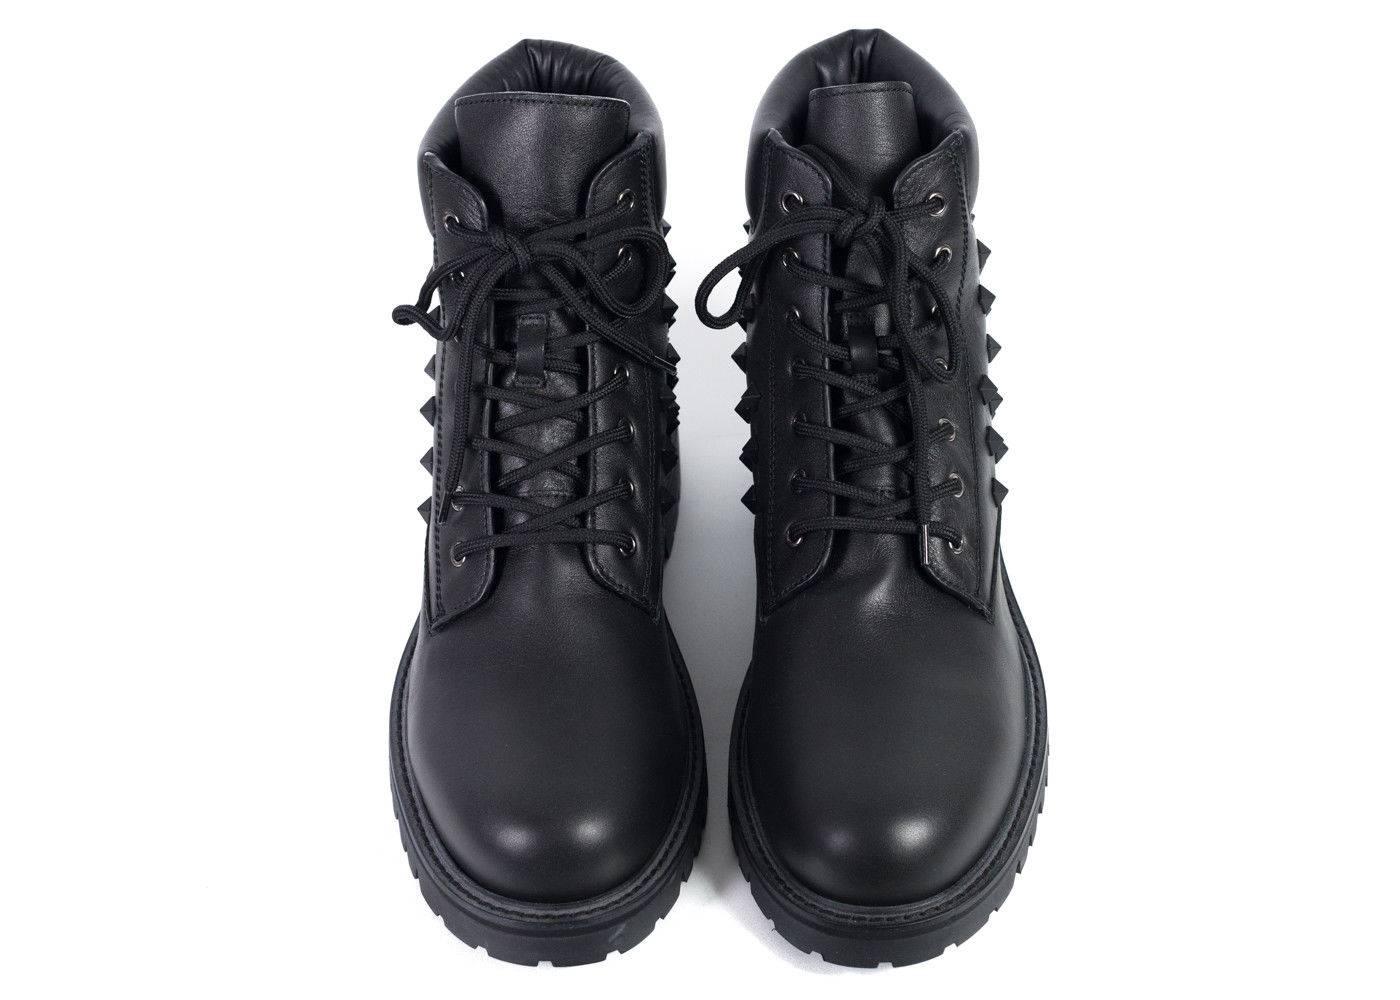 Brand New Valentino Men's Combat Boots
Original Box & Dust Bag Included
Retails in Stores & Online for $1345
Size IT41.5 / US8.5 Fits True to Size

Valentino's rendition of a classic black combat boot with their house's signature rocketed